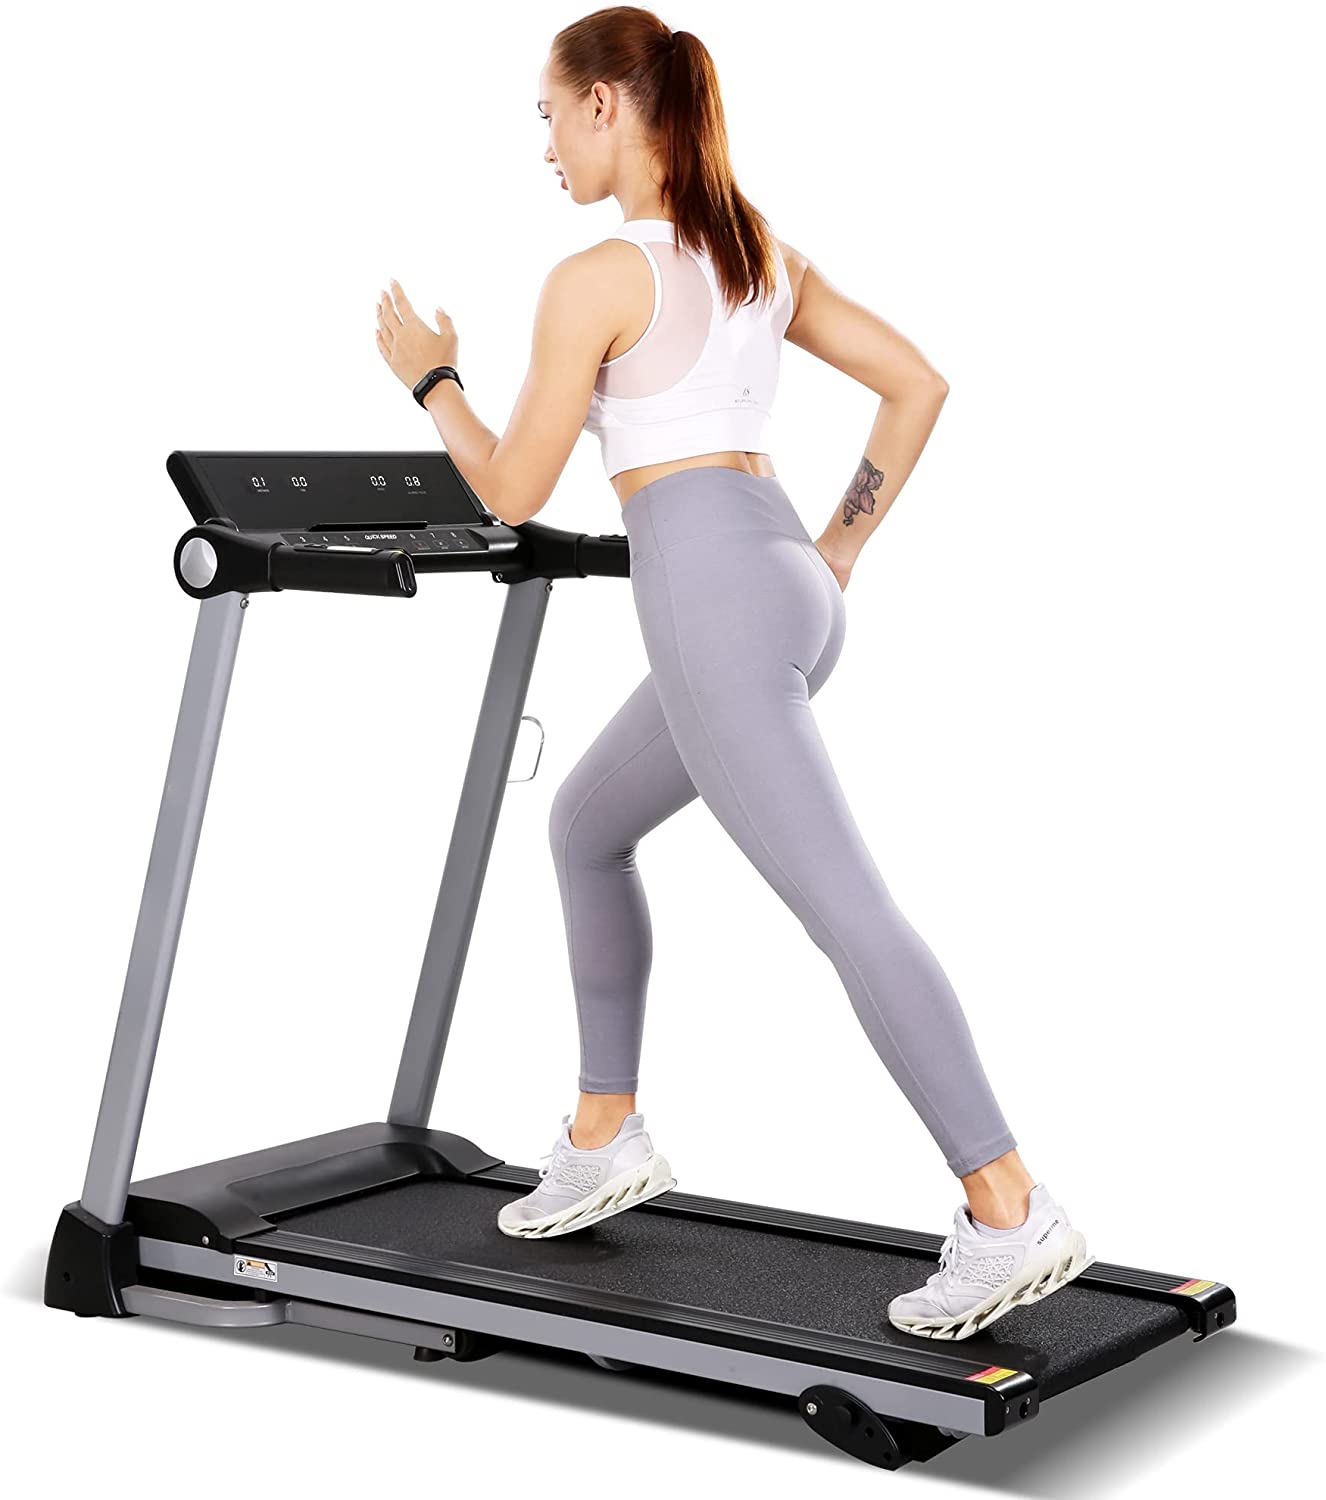 Load image into Gallery viewer, Treadmill for Home Treadmill Running Machine Folding Treadmill Electric Treadmill Workout with 15 Pre-Set Programs 8.5 MPH Max Speed Extra-Large LCD Display for Home Use
